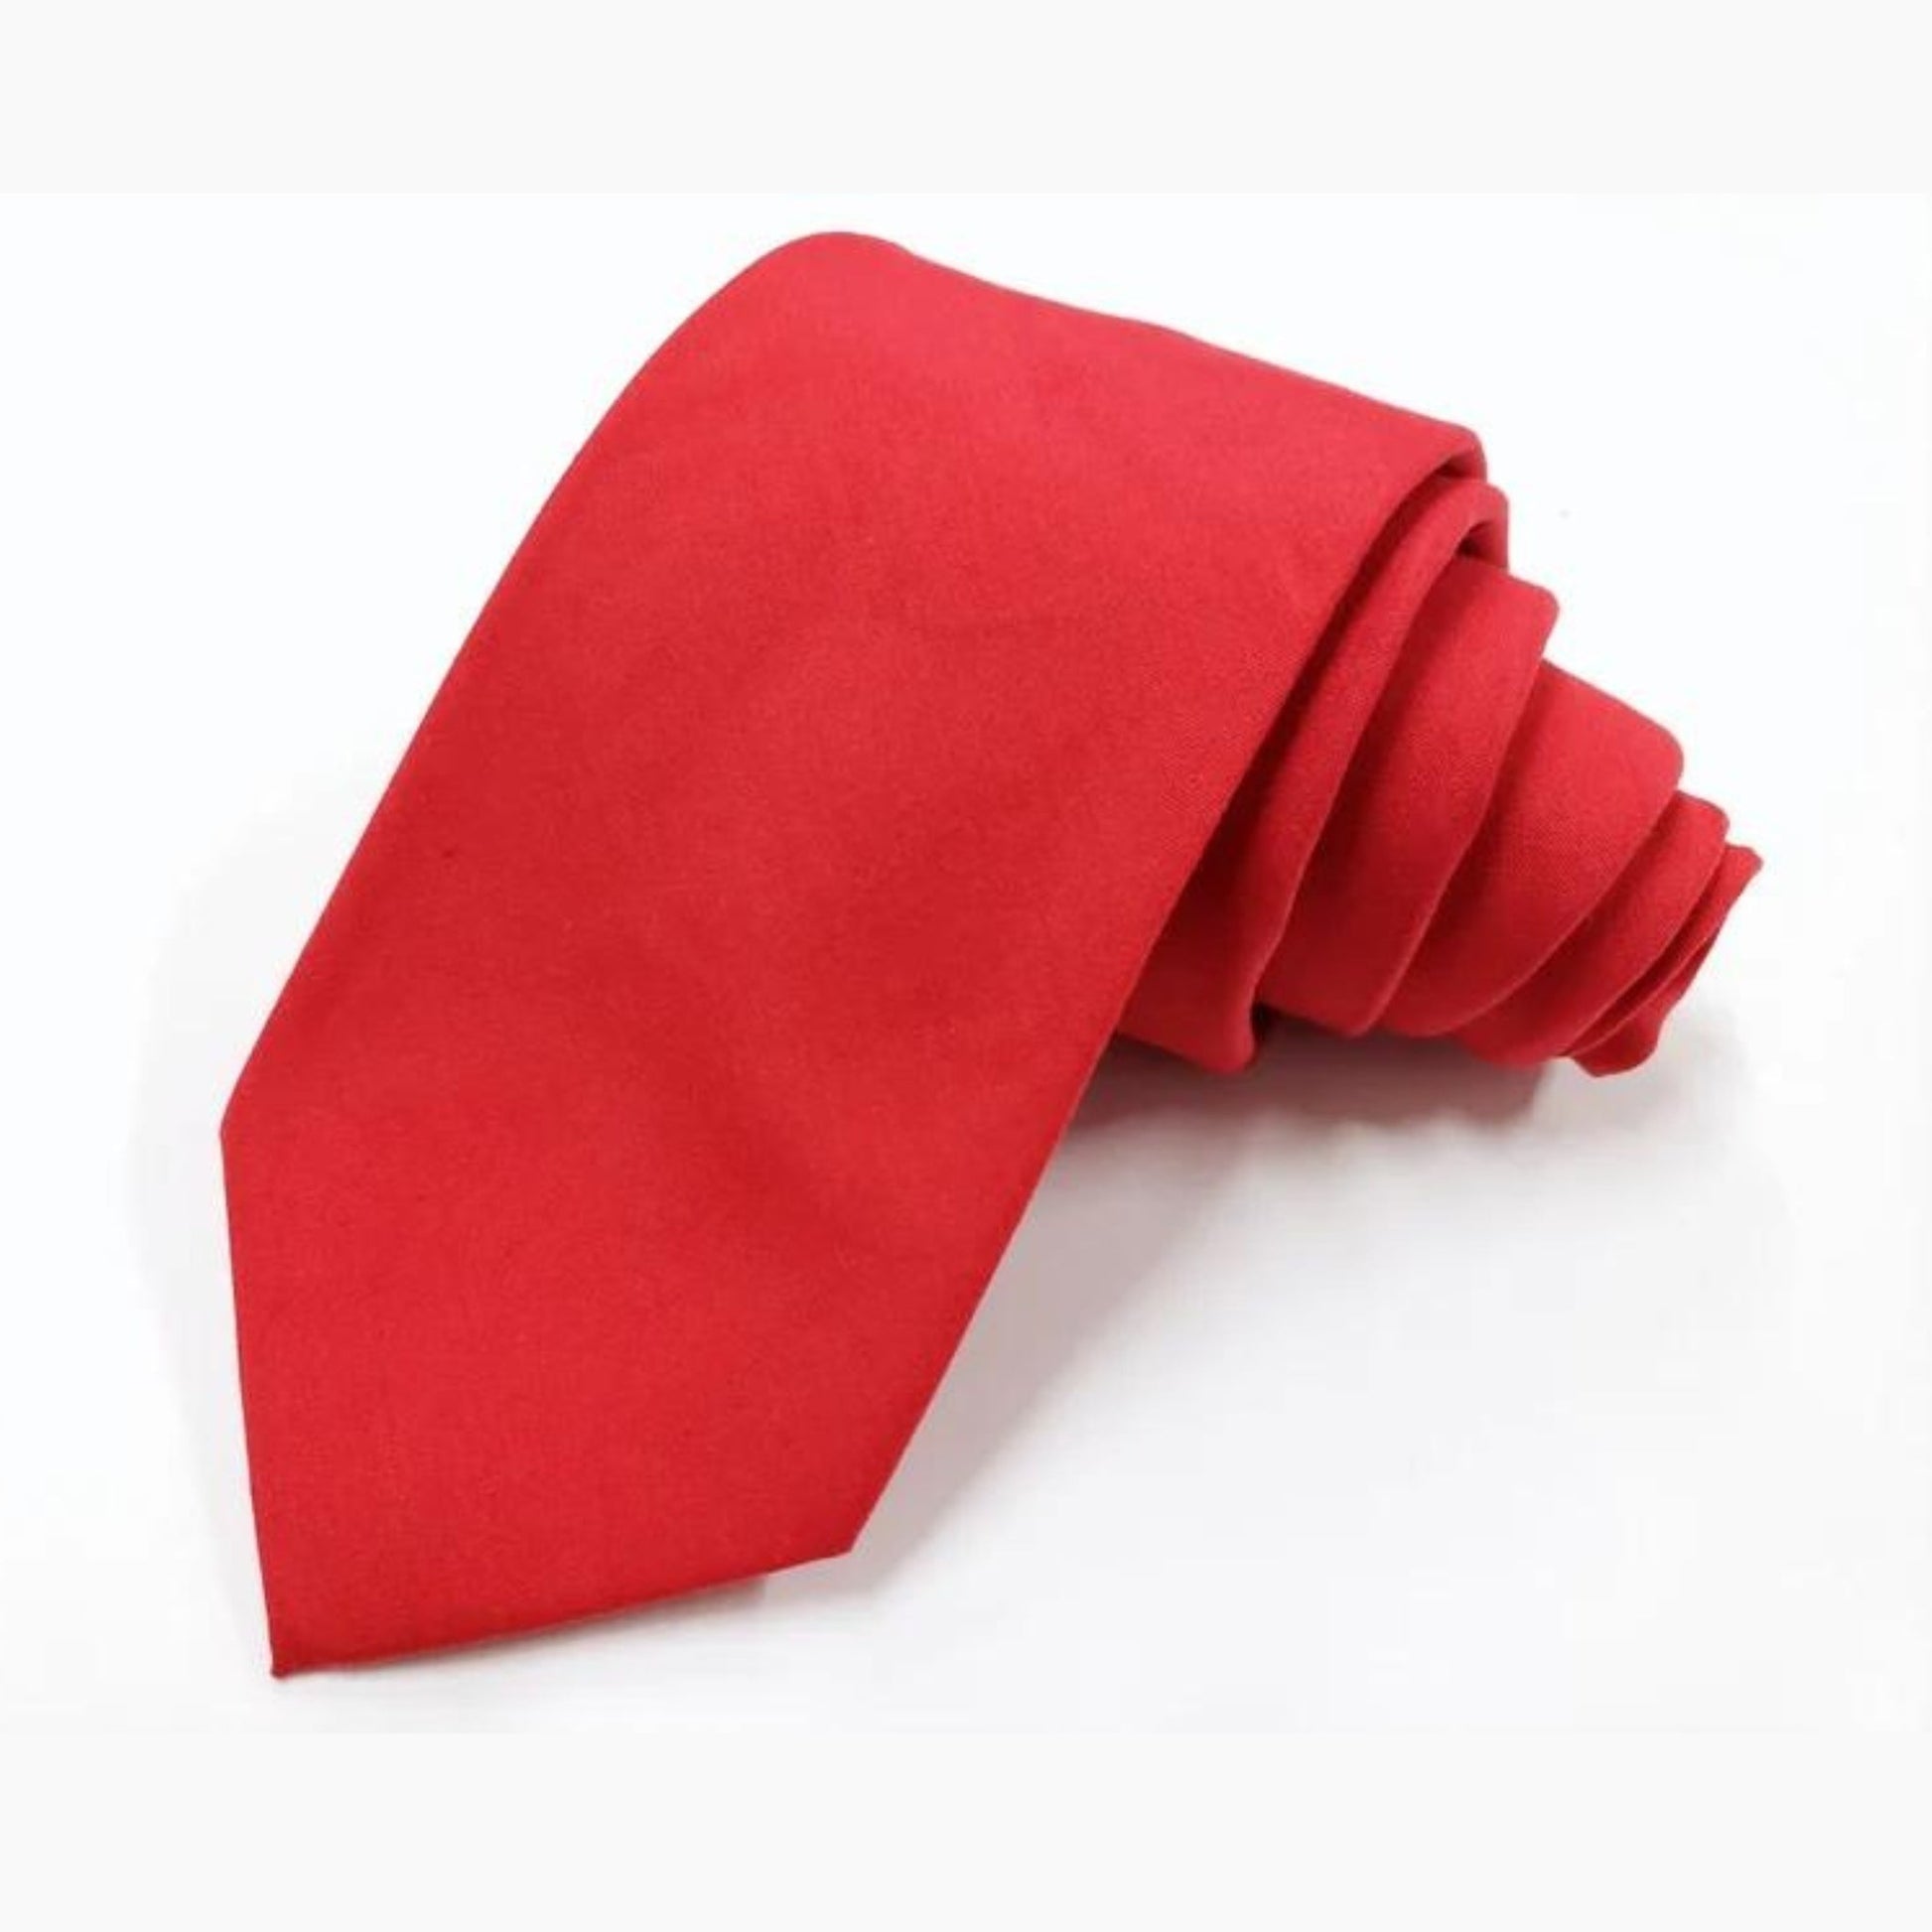 YOUTH ROBE's Solid Tie (Red) - YOUTH ROBE